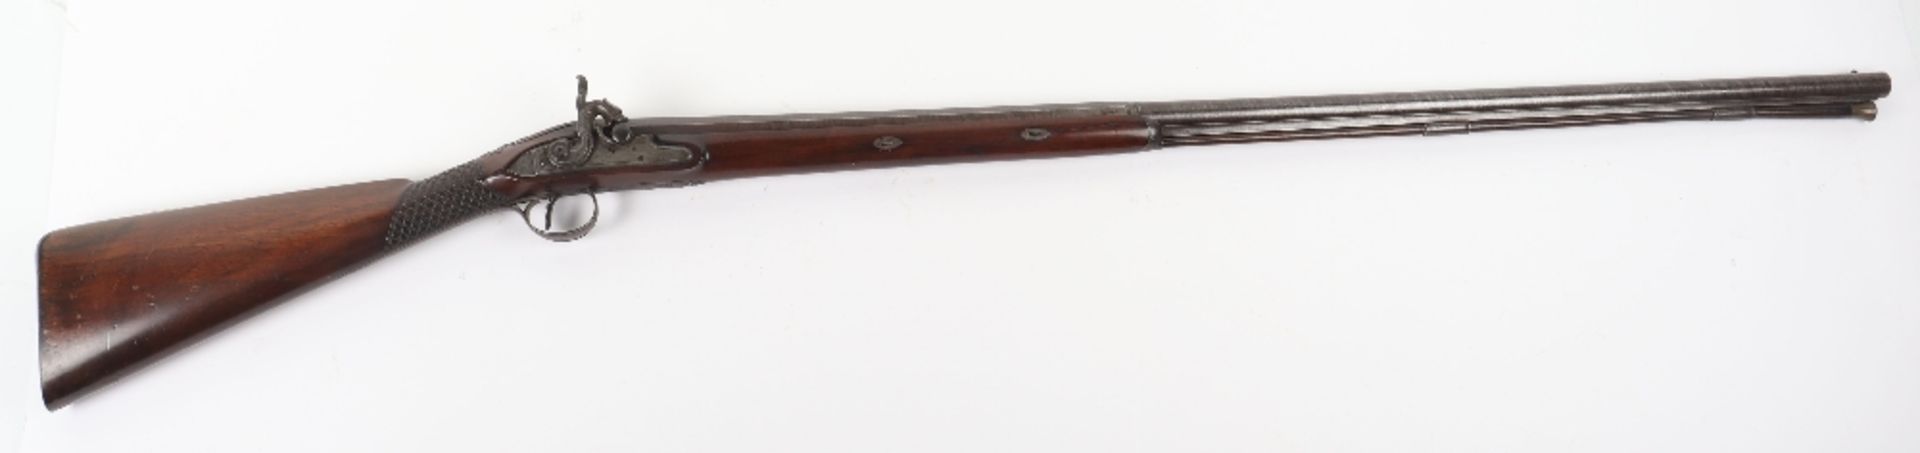 16-Bore Percussion Sporting Gun by D. Egg, Late 18th Century